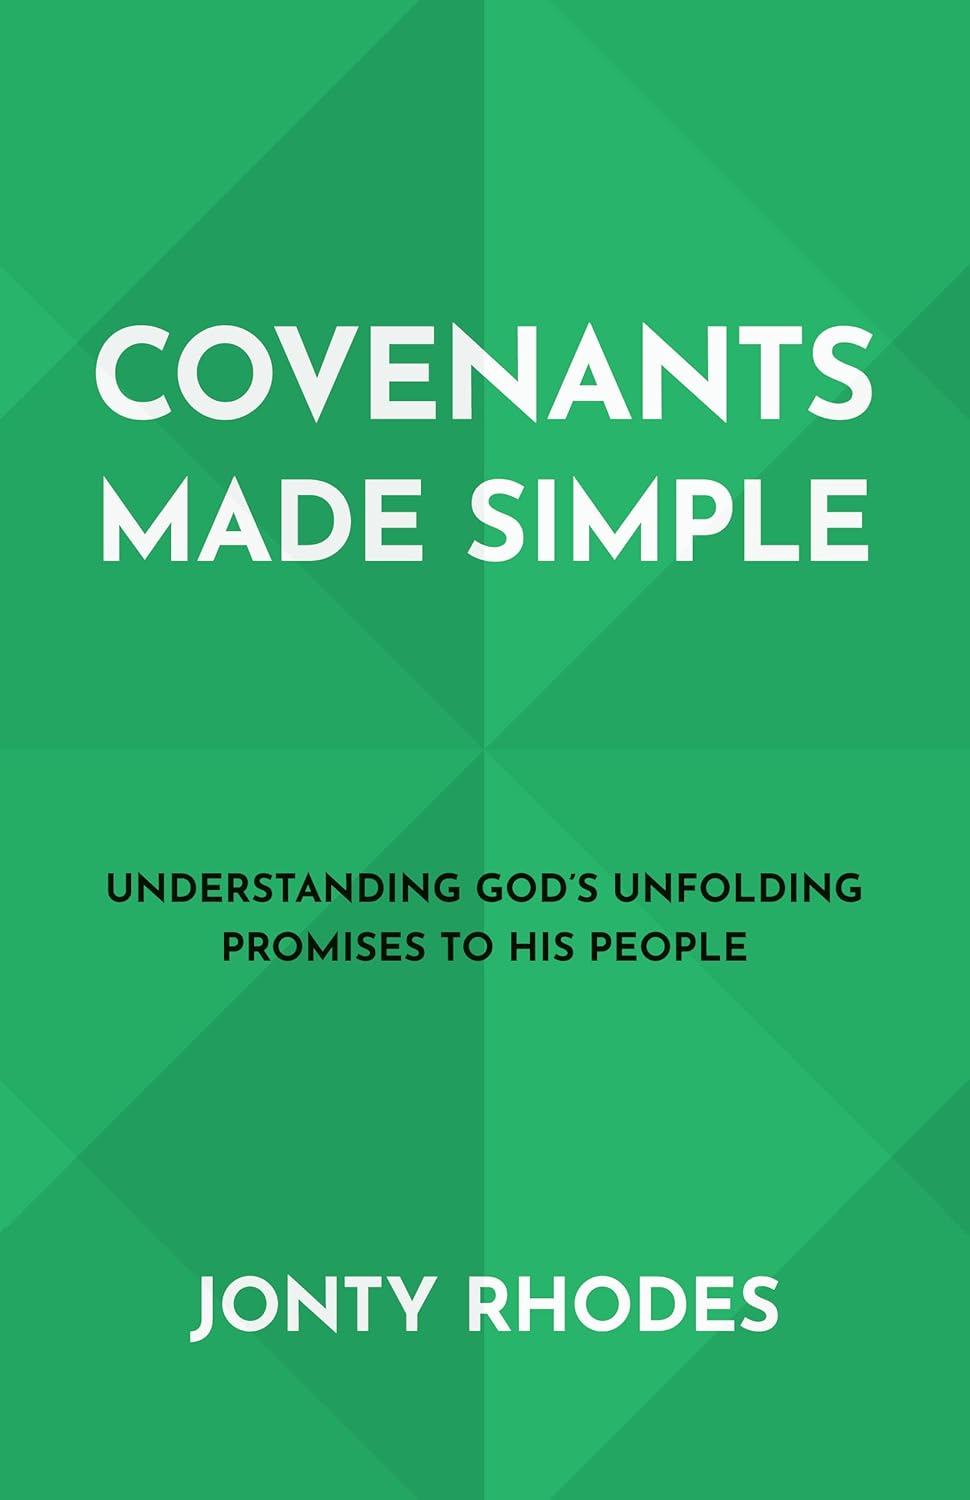 Covenants Made Simple (Rhodes - paperback)